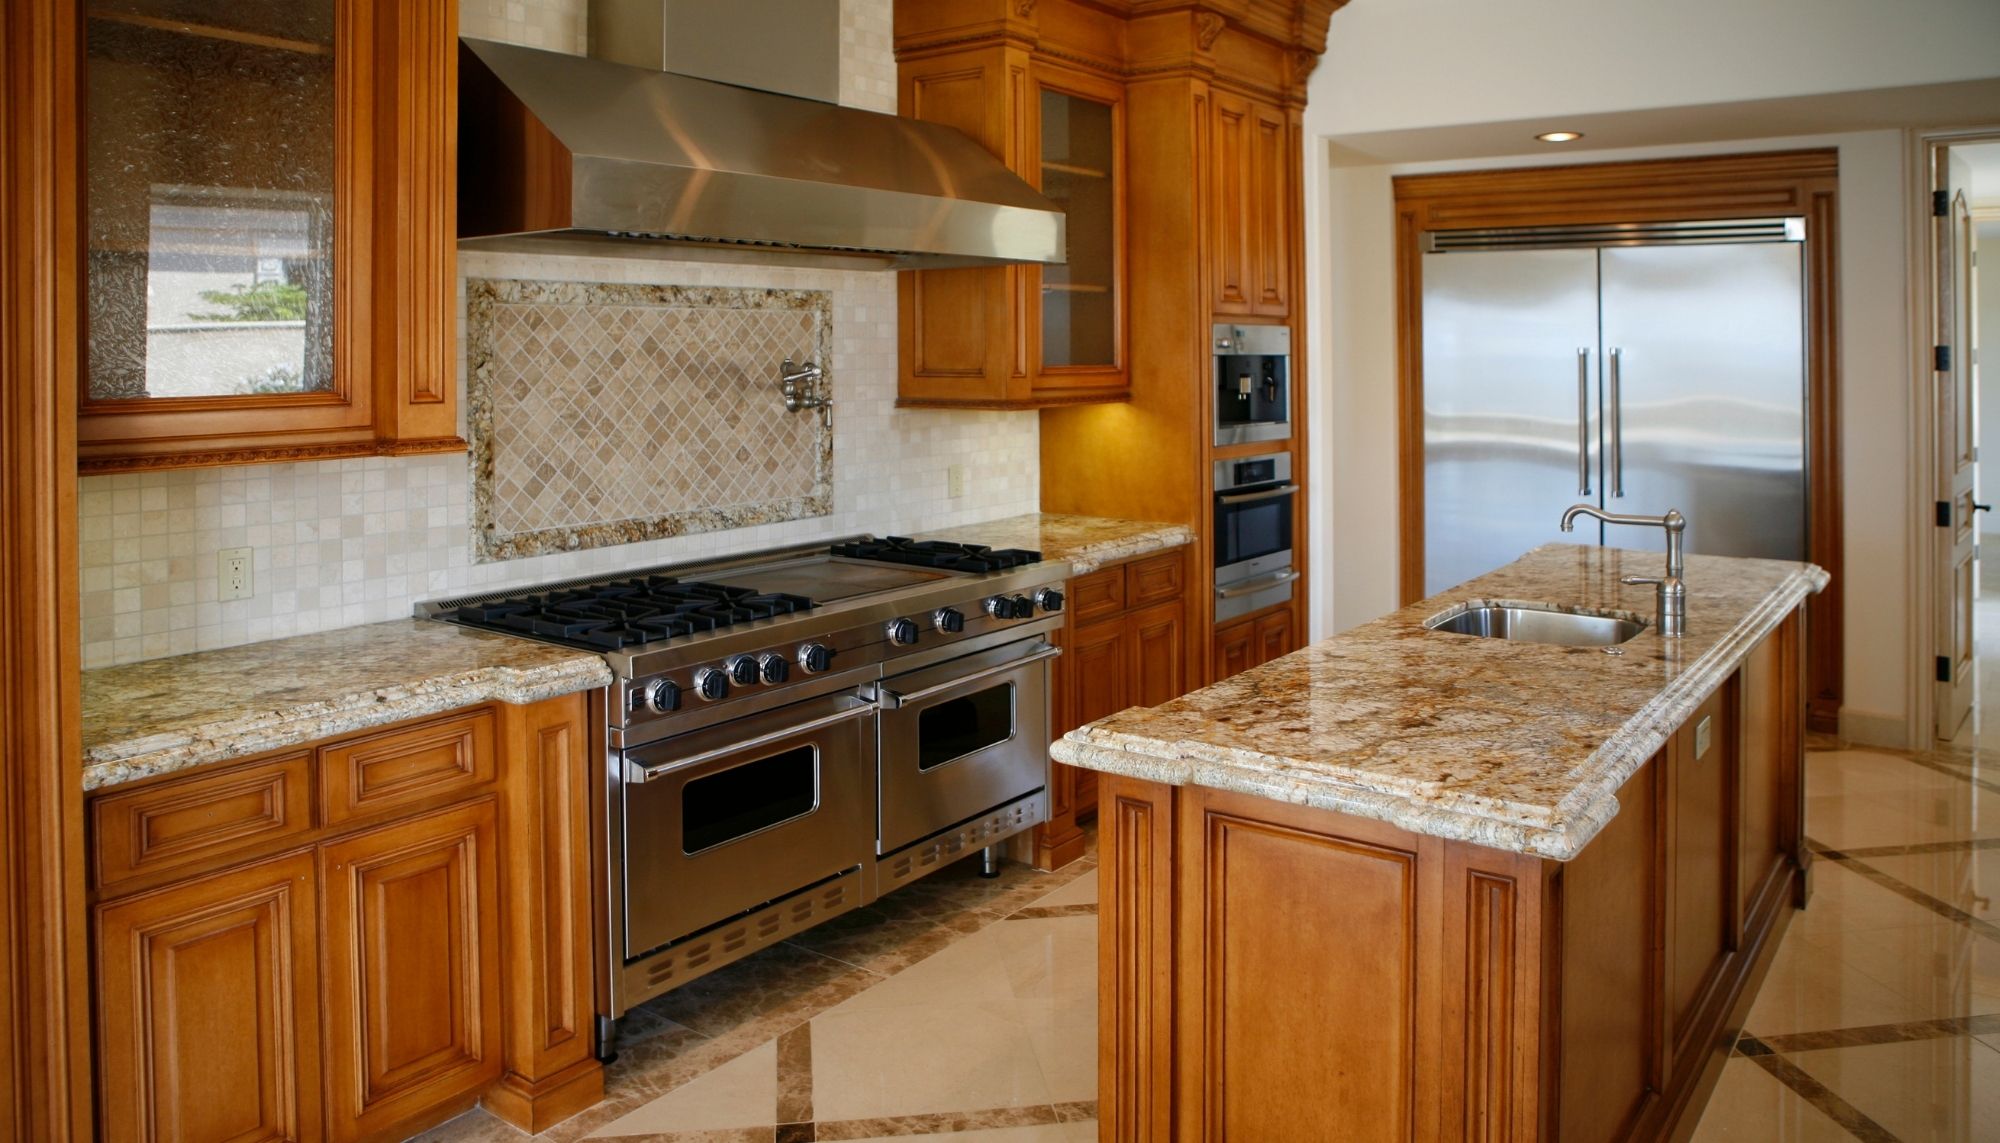 Cake Eaters Kitchen Remodeling